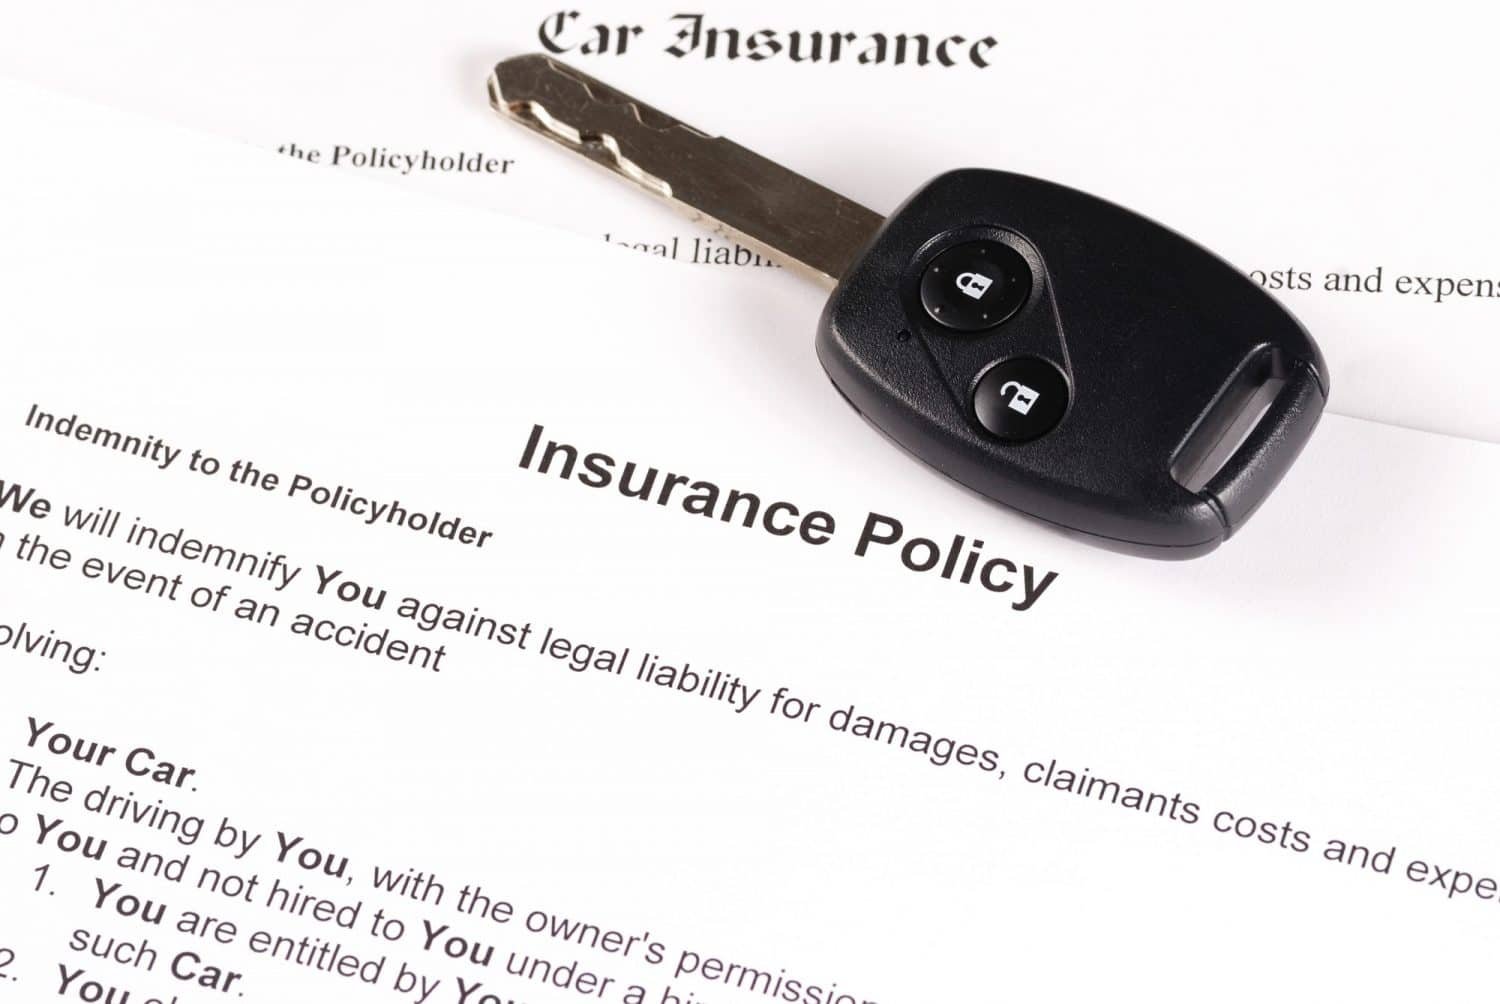 Car Insurance | Buying_used_car_from_dealer | VIN Check | VehiclecheckUSA